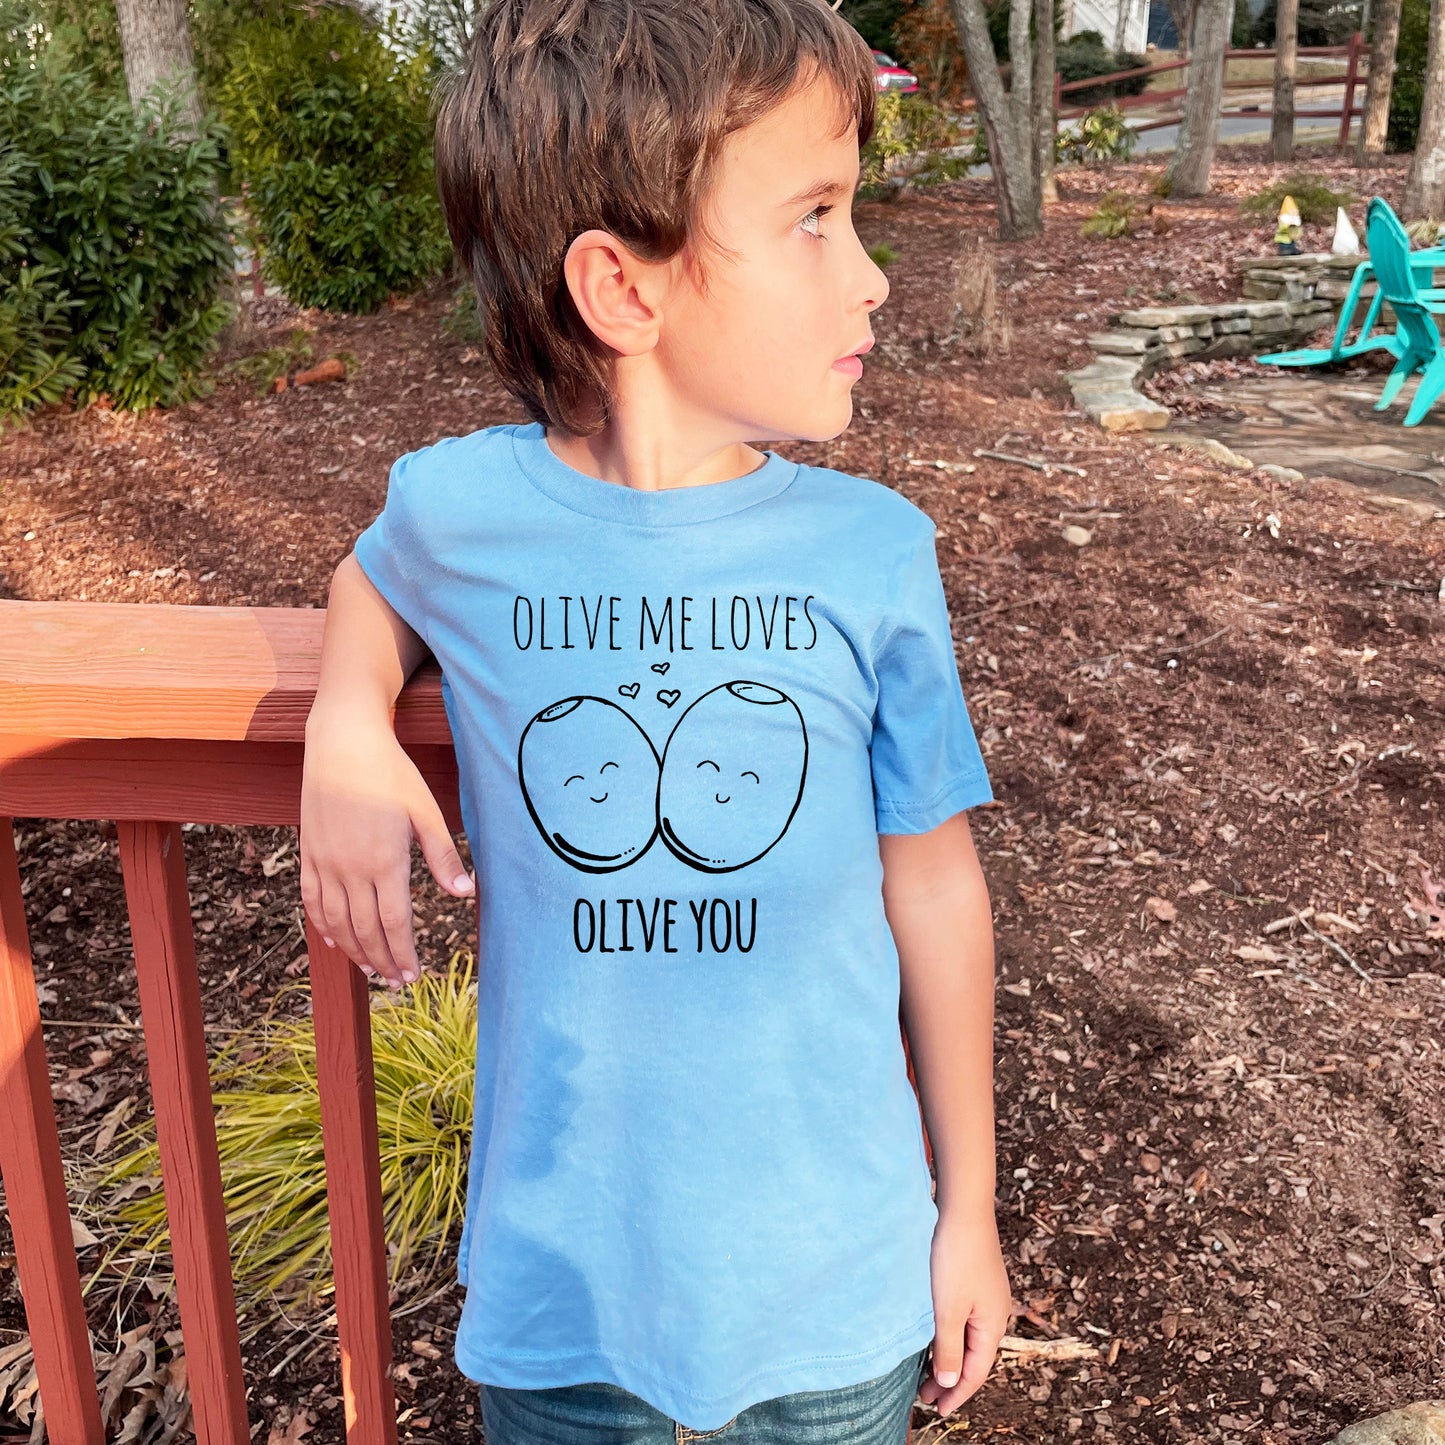 Olive Me Loves Olive You - Kid's Tee - Columbia Blue or Lavender